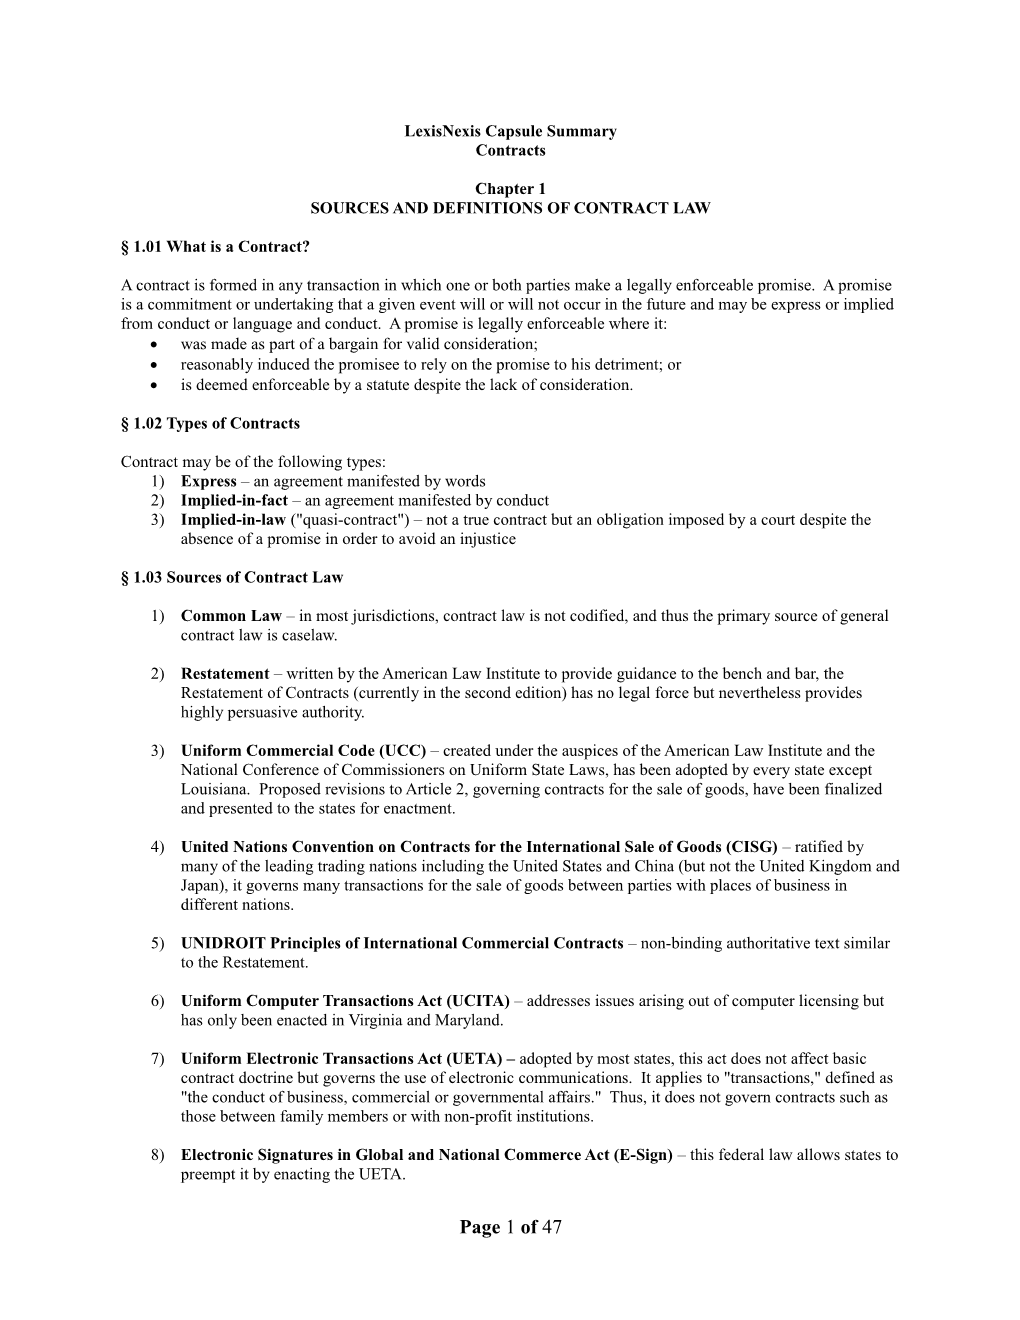 Contracts Area of Law Summary